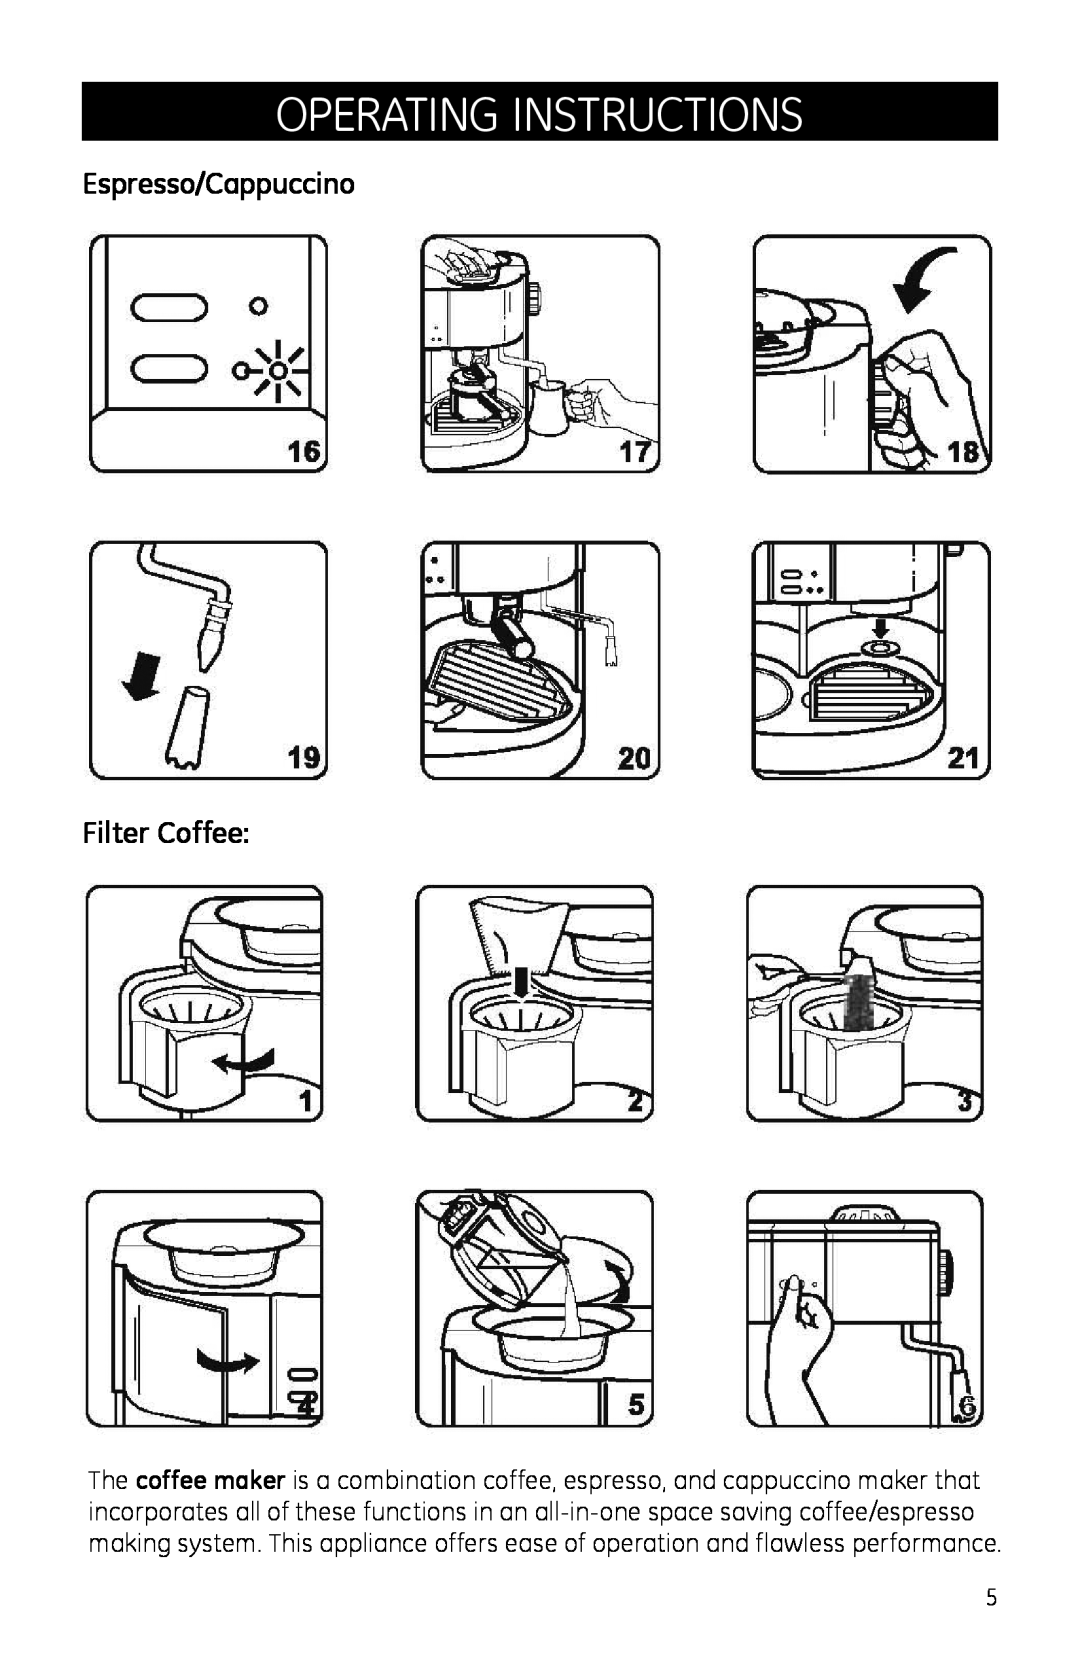 GE 681131690690 manual Espresso/Cappuccino Filter Coffee, operating instructions 